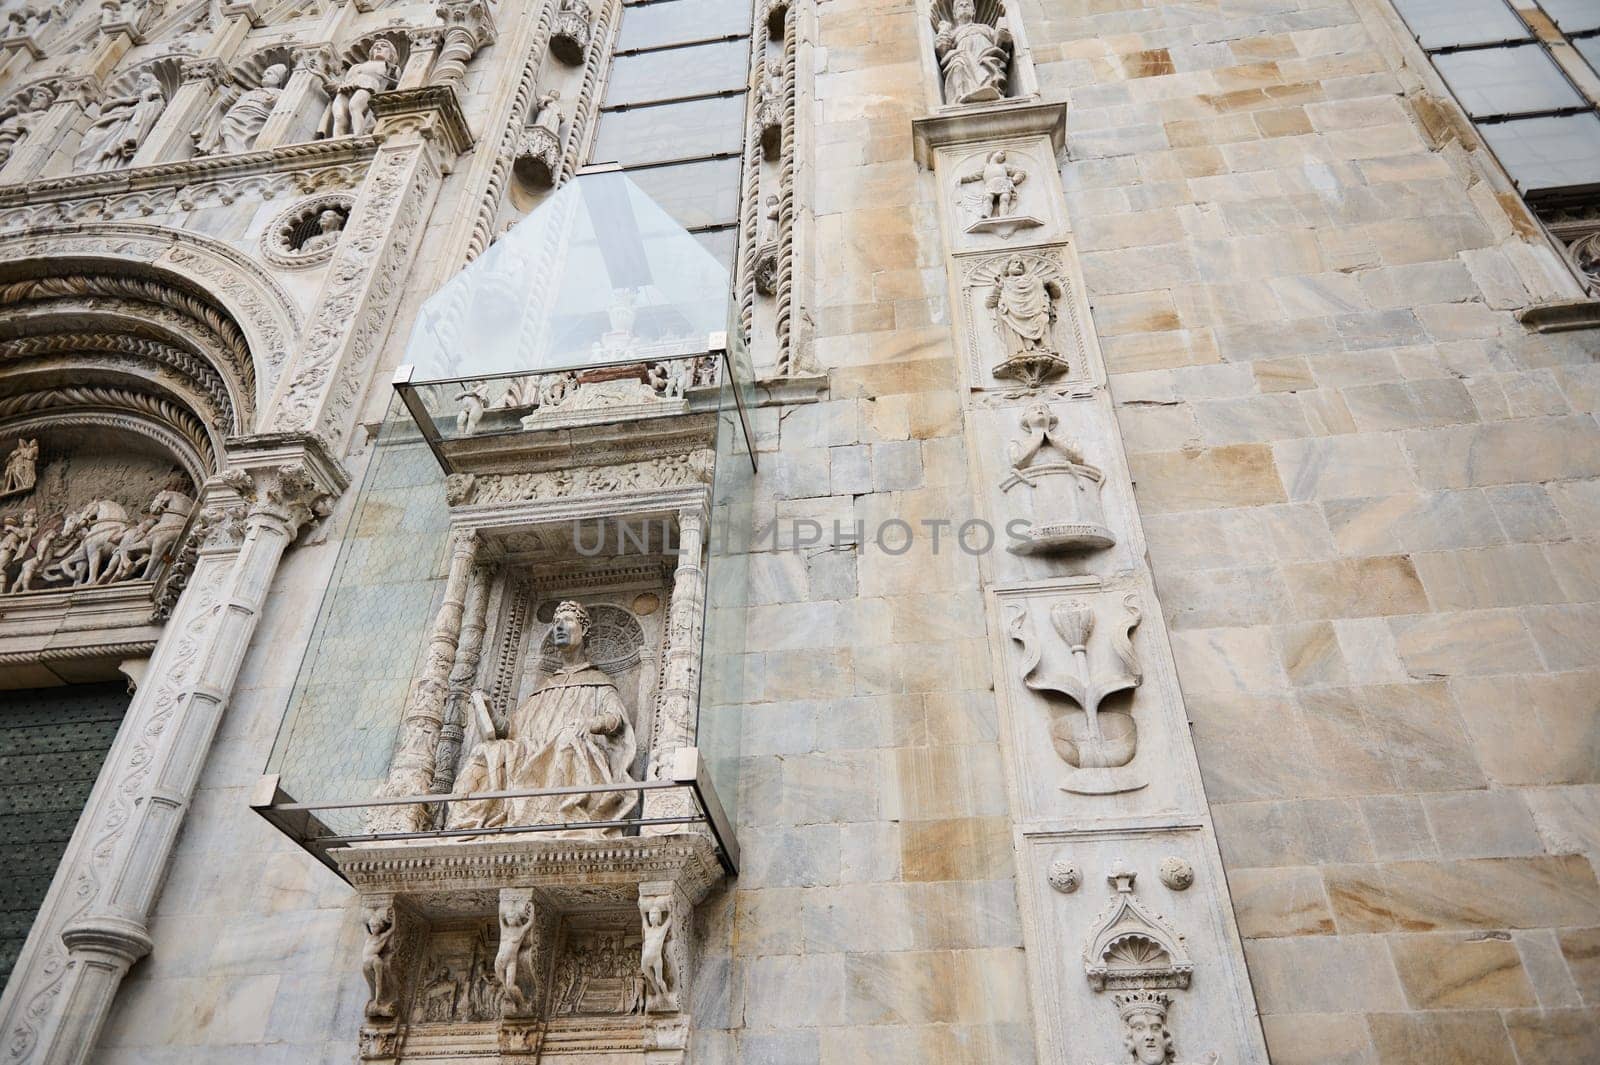 Exterior of the Cathedral in the city of Como, with Italian architectural details, sculpture, stone carvings, covered with a protective glass structure from external influences. Lombardy. Italy